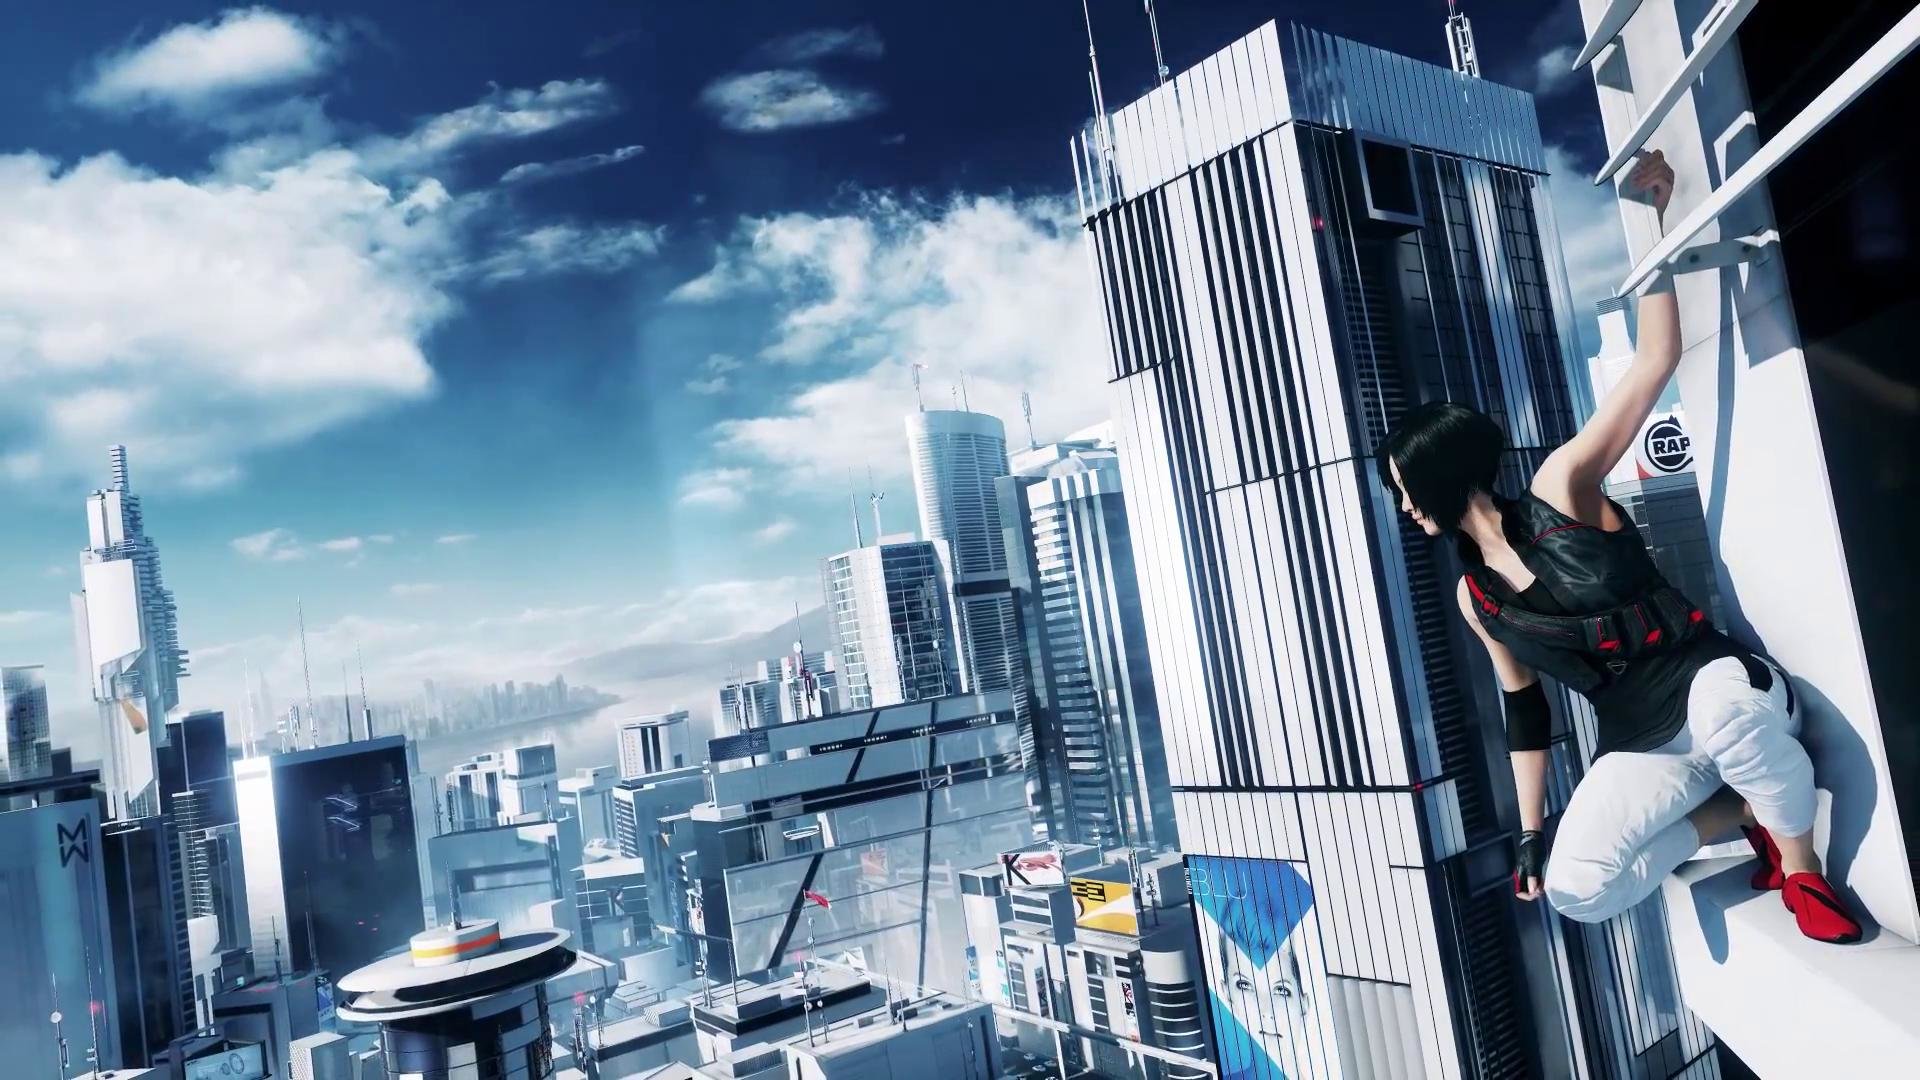 Download full hd 1920x1080 Mirror's Edge PC background ID:324503 for free